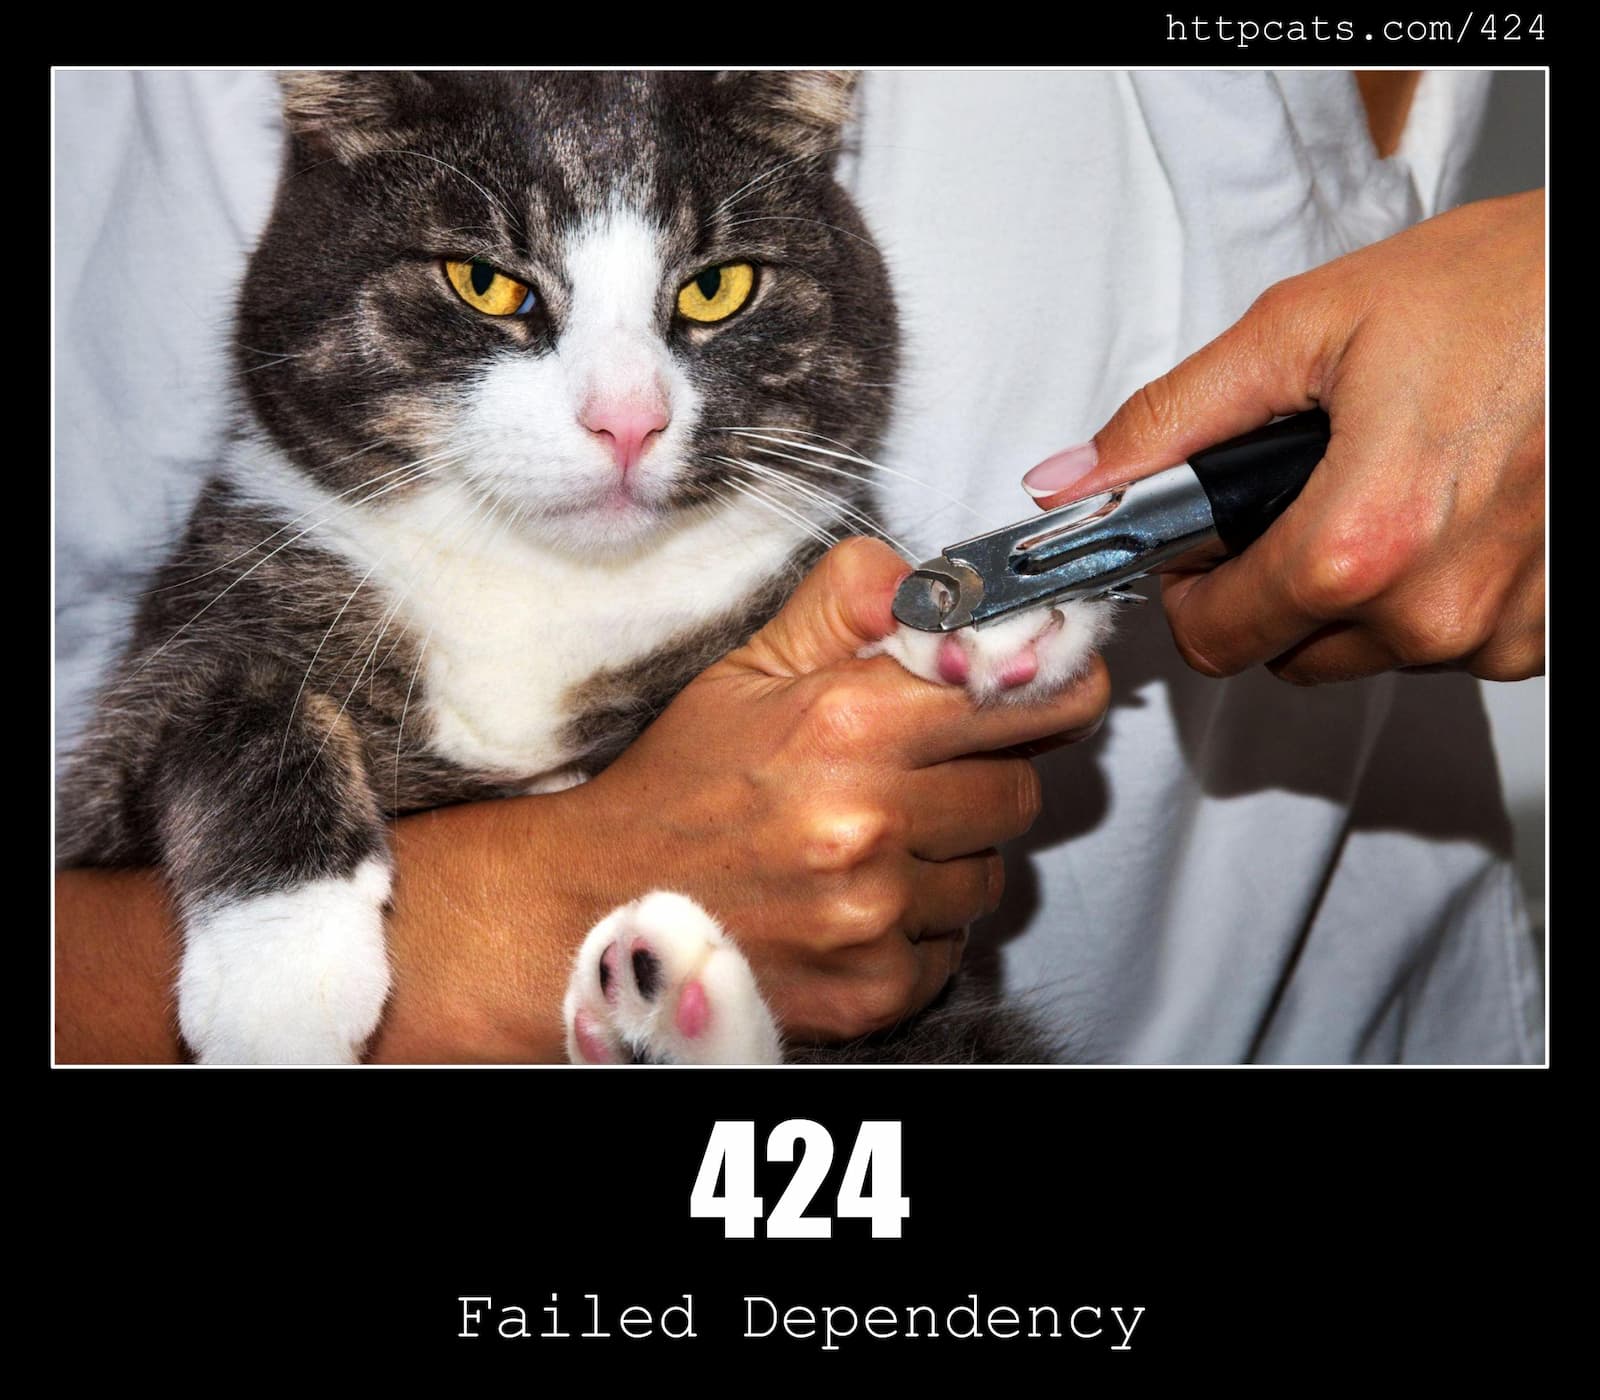 HTTP Status Code 424 Failed Dependency & Cats